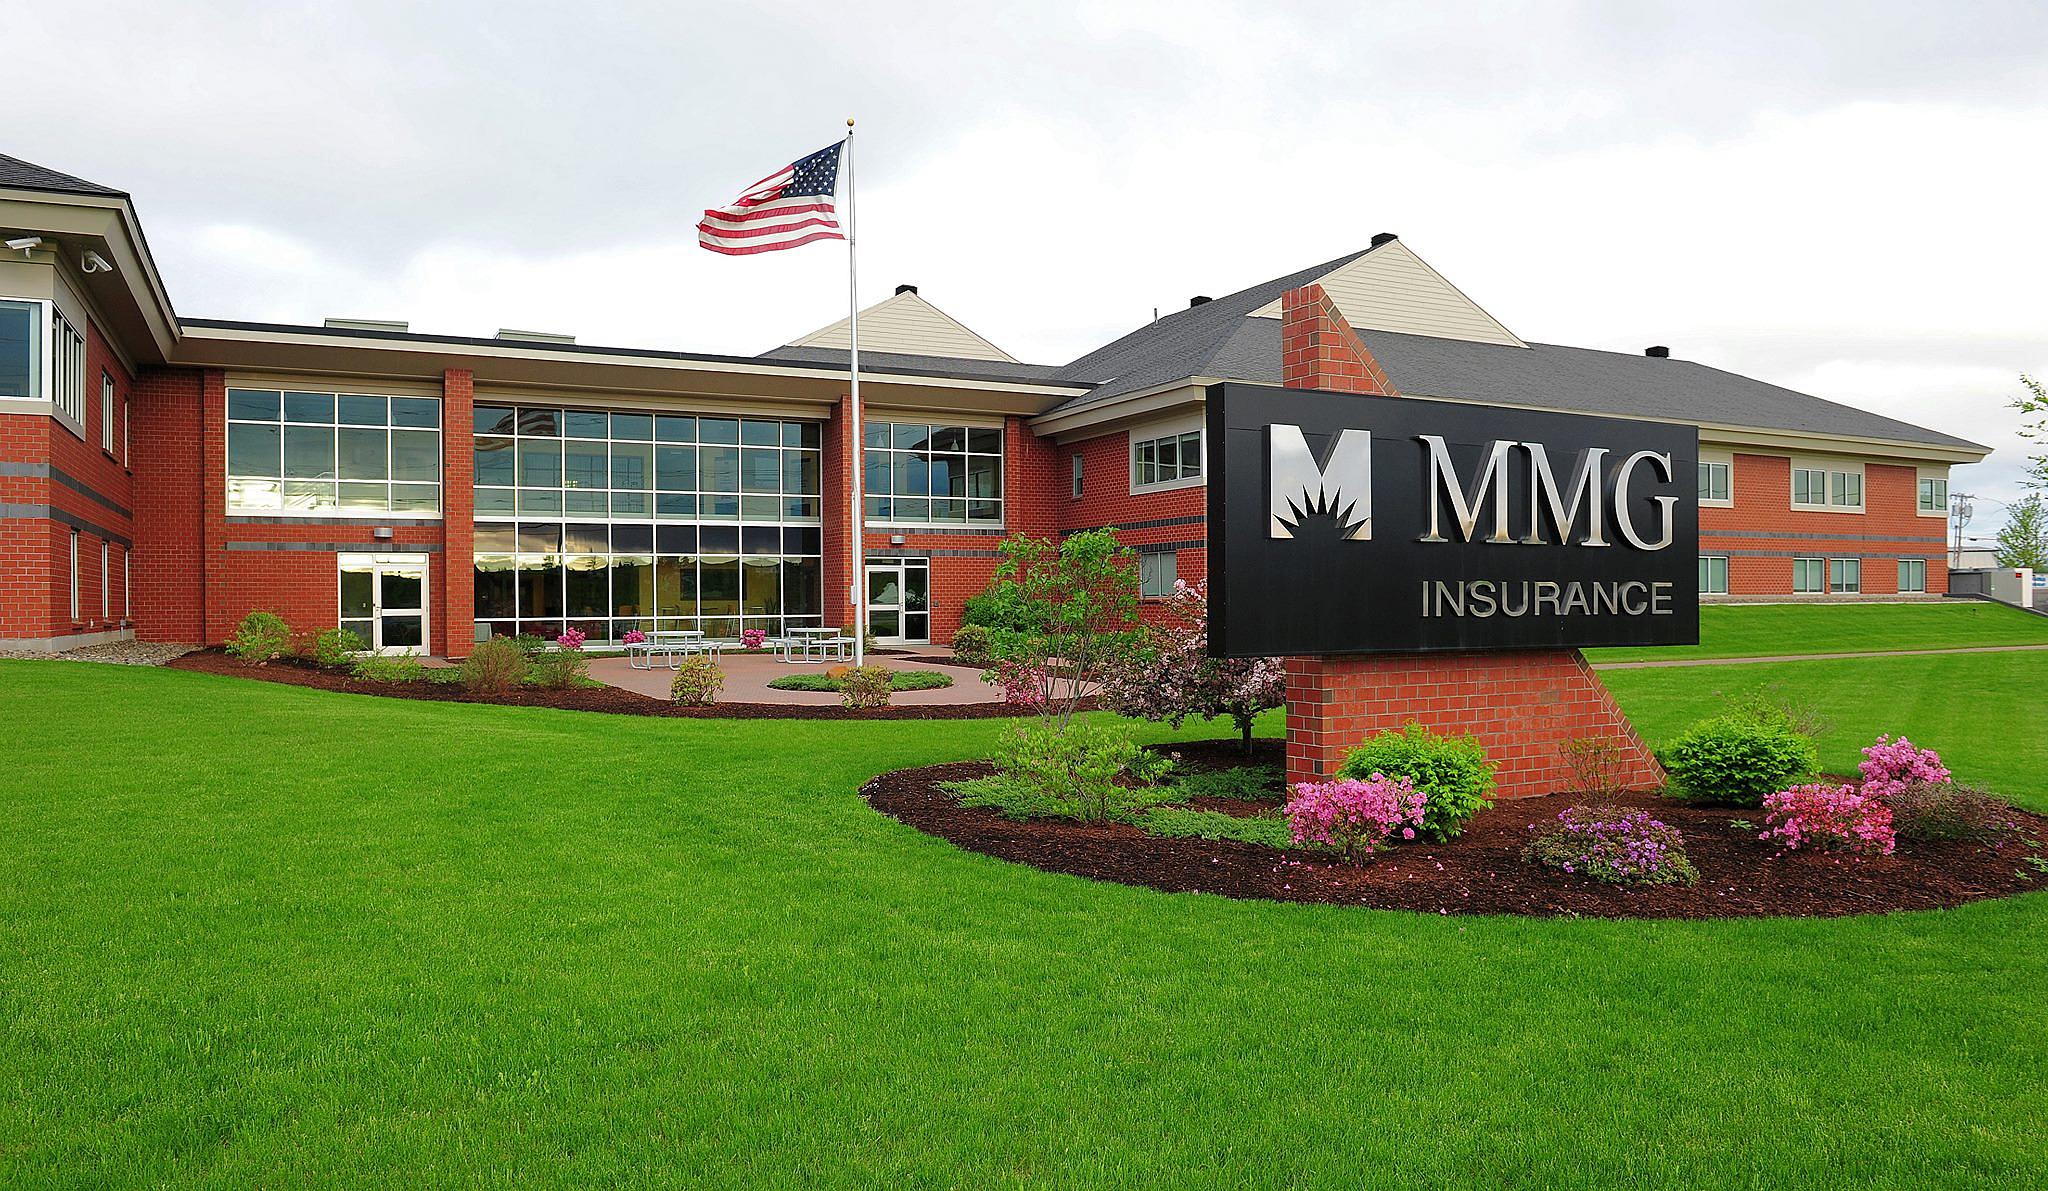 MMG Insurance and Husson University Sign Agreement